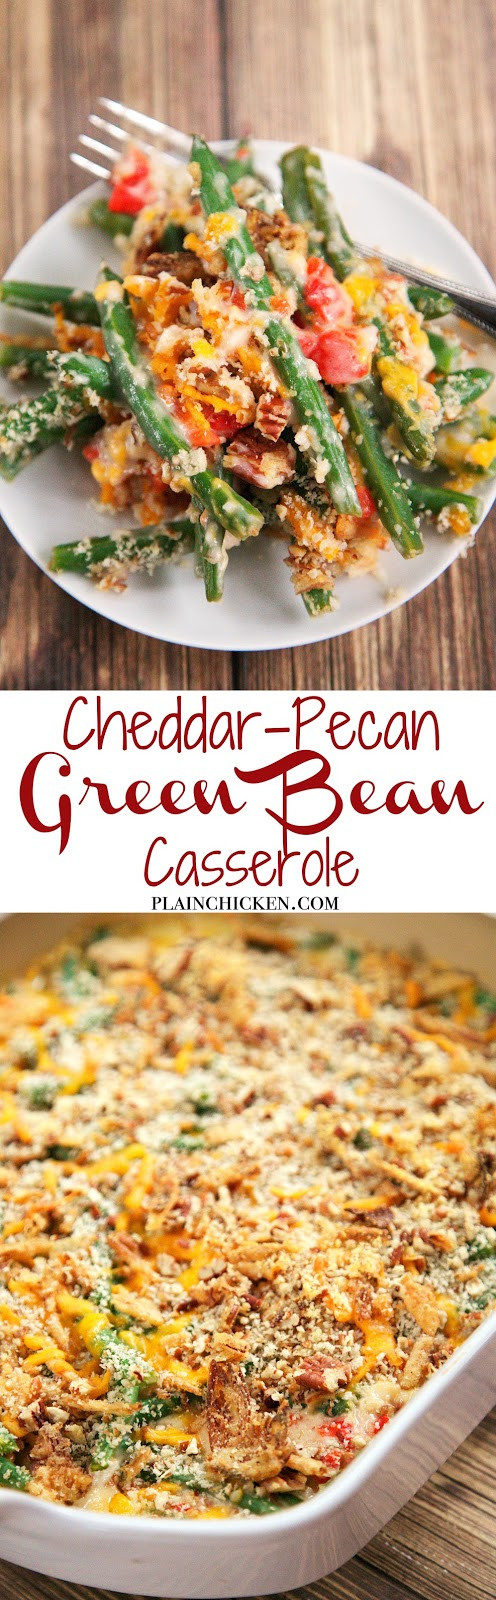 Can You Make Green Bean Casserole Ahead Of Time
 Cheddar Pecan Green Bean Casserole